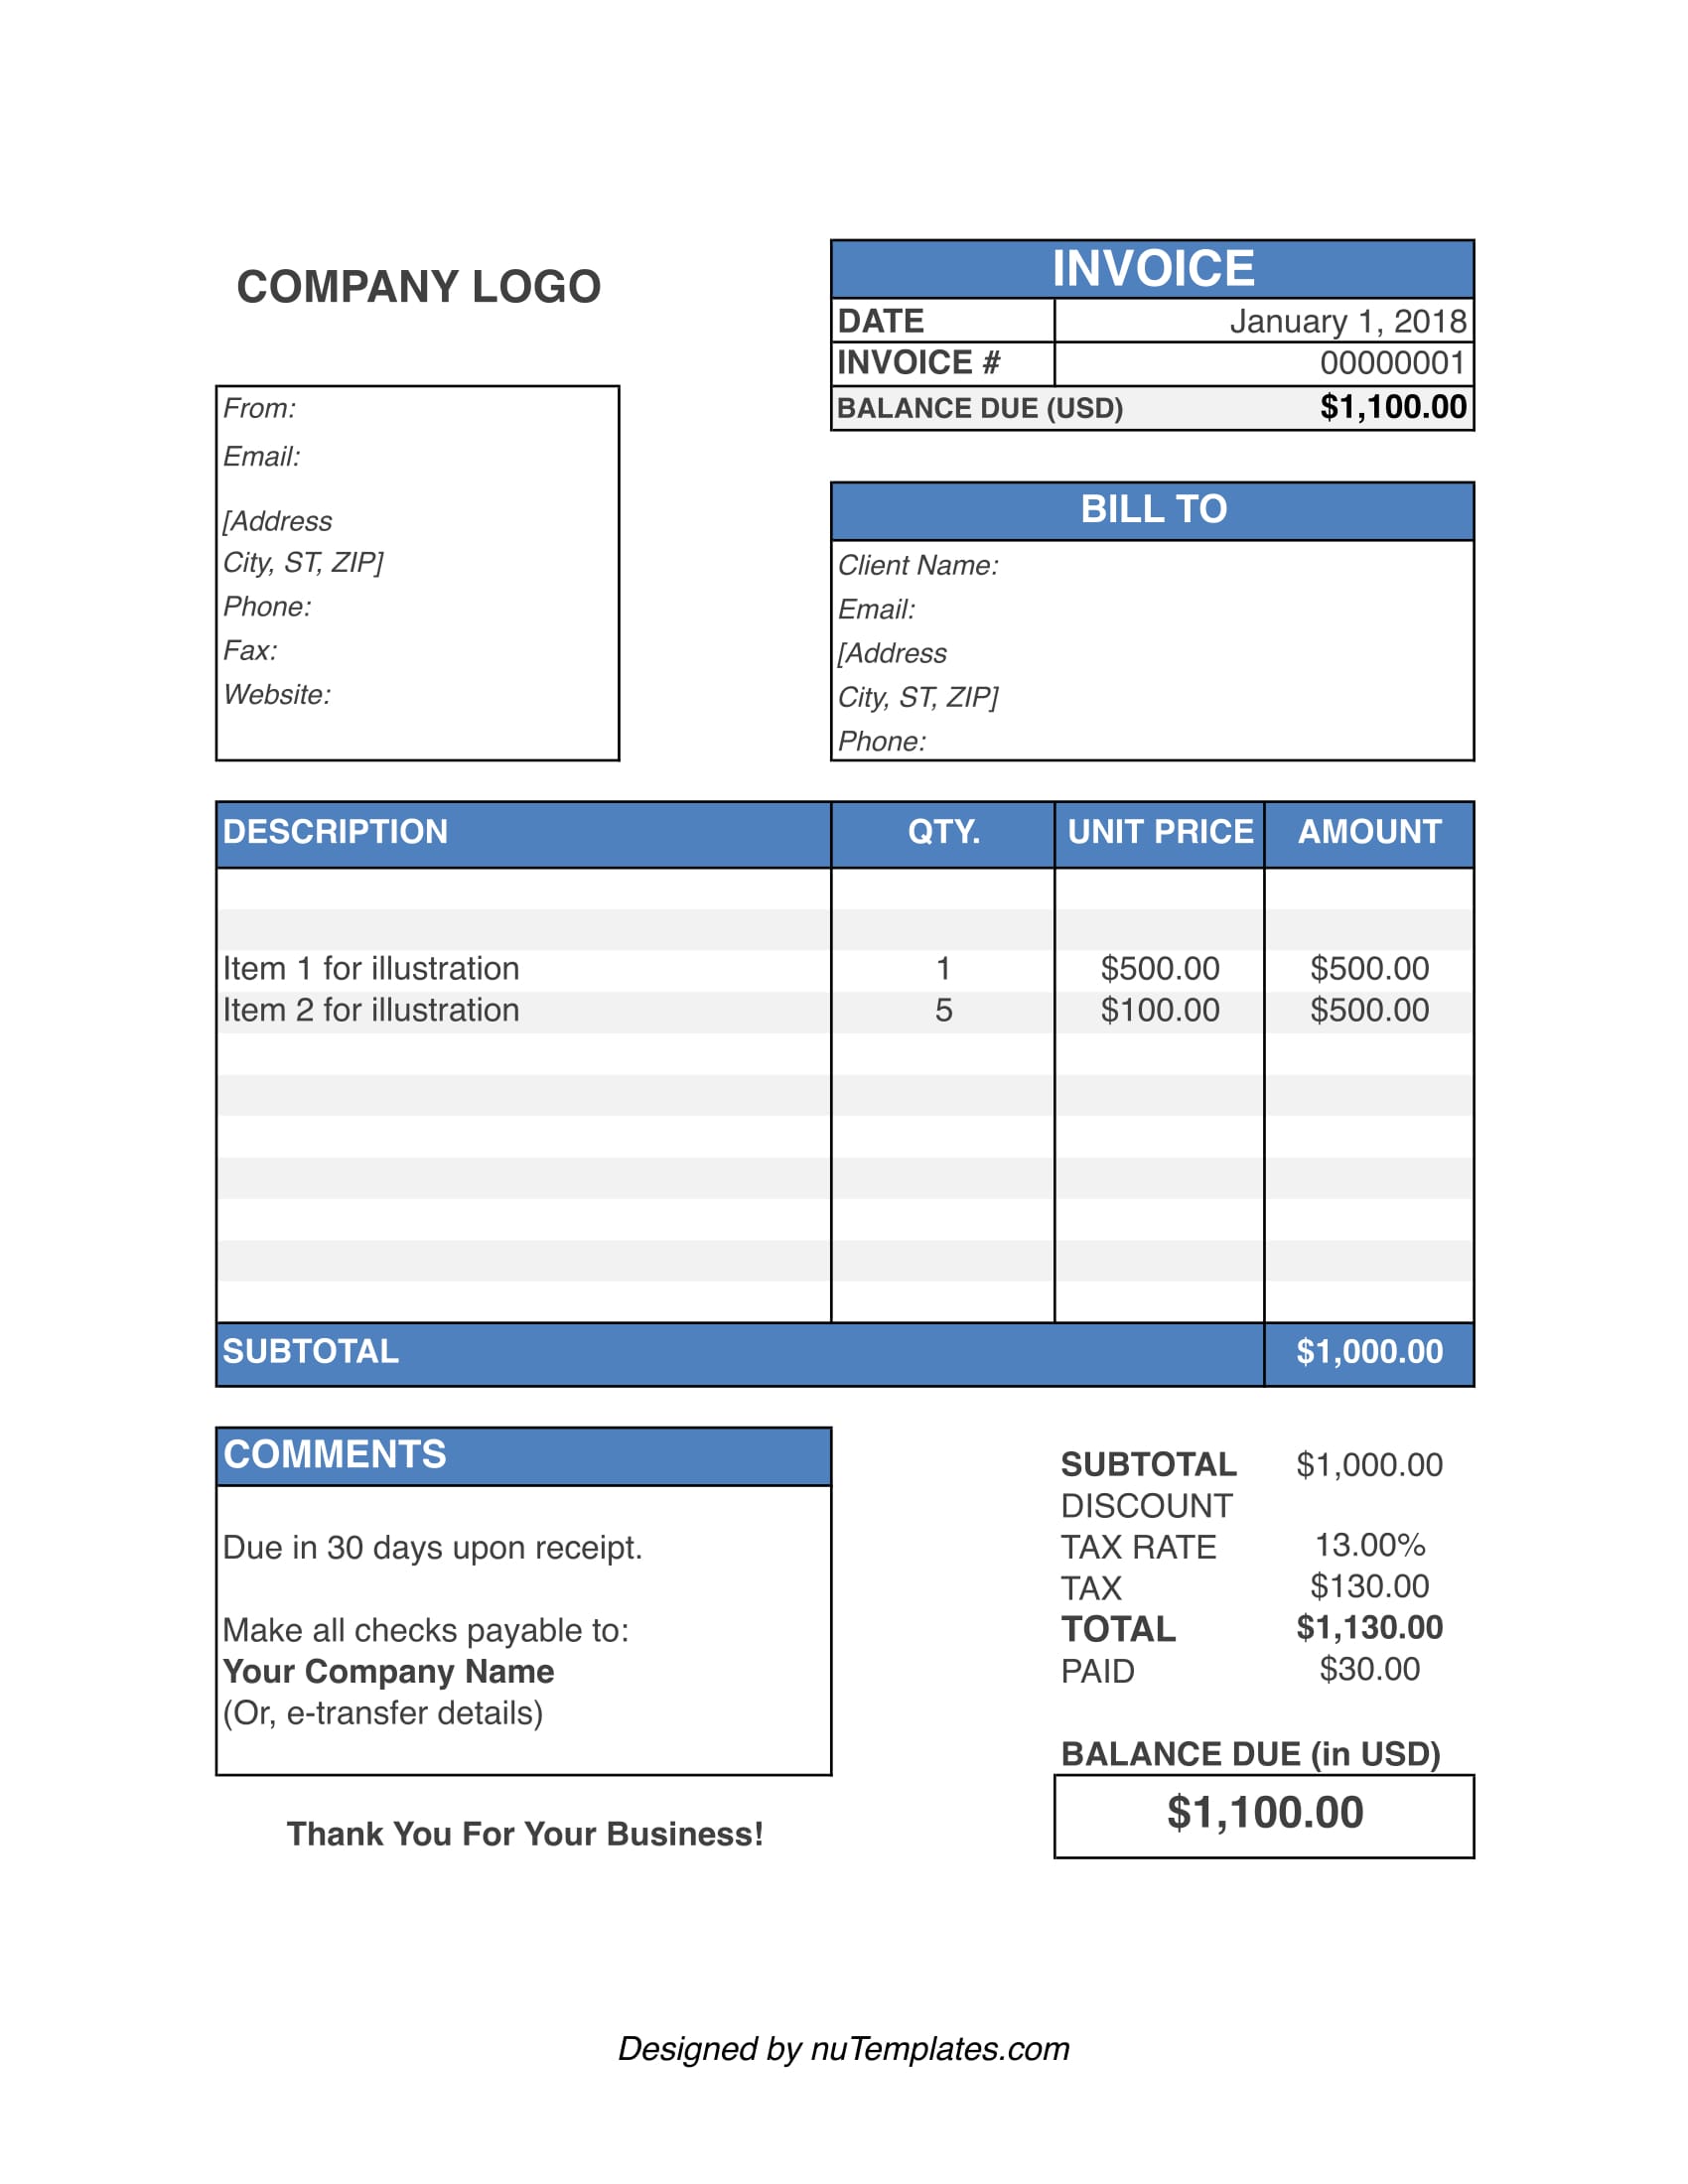 Business Invoice Template Business Invoices nuTemplates